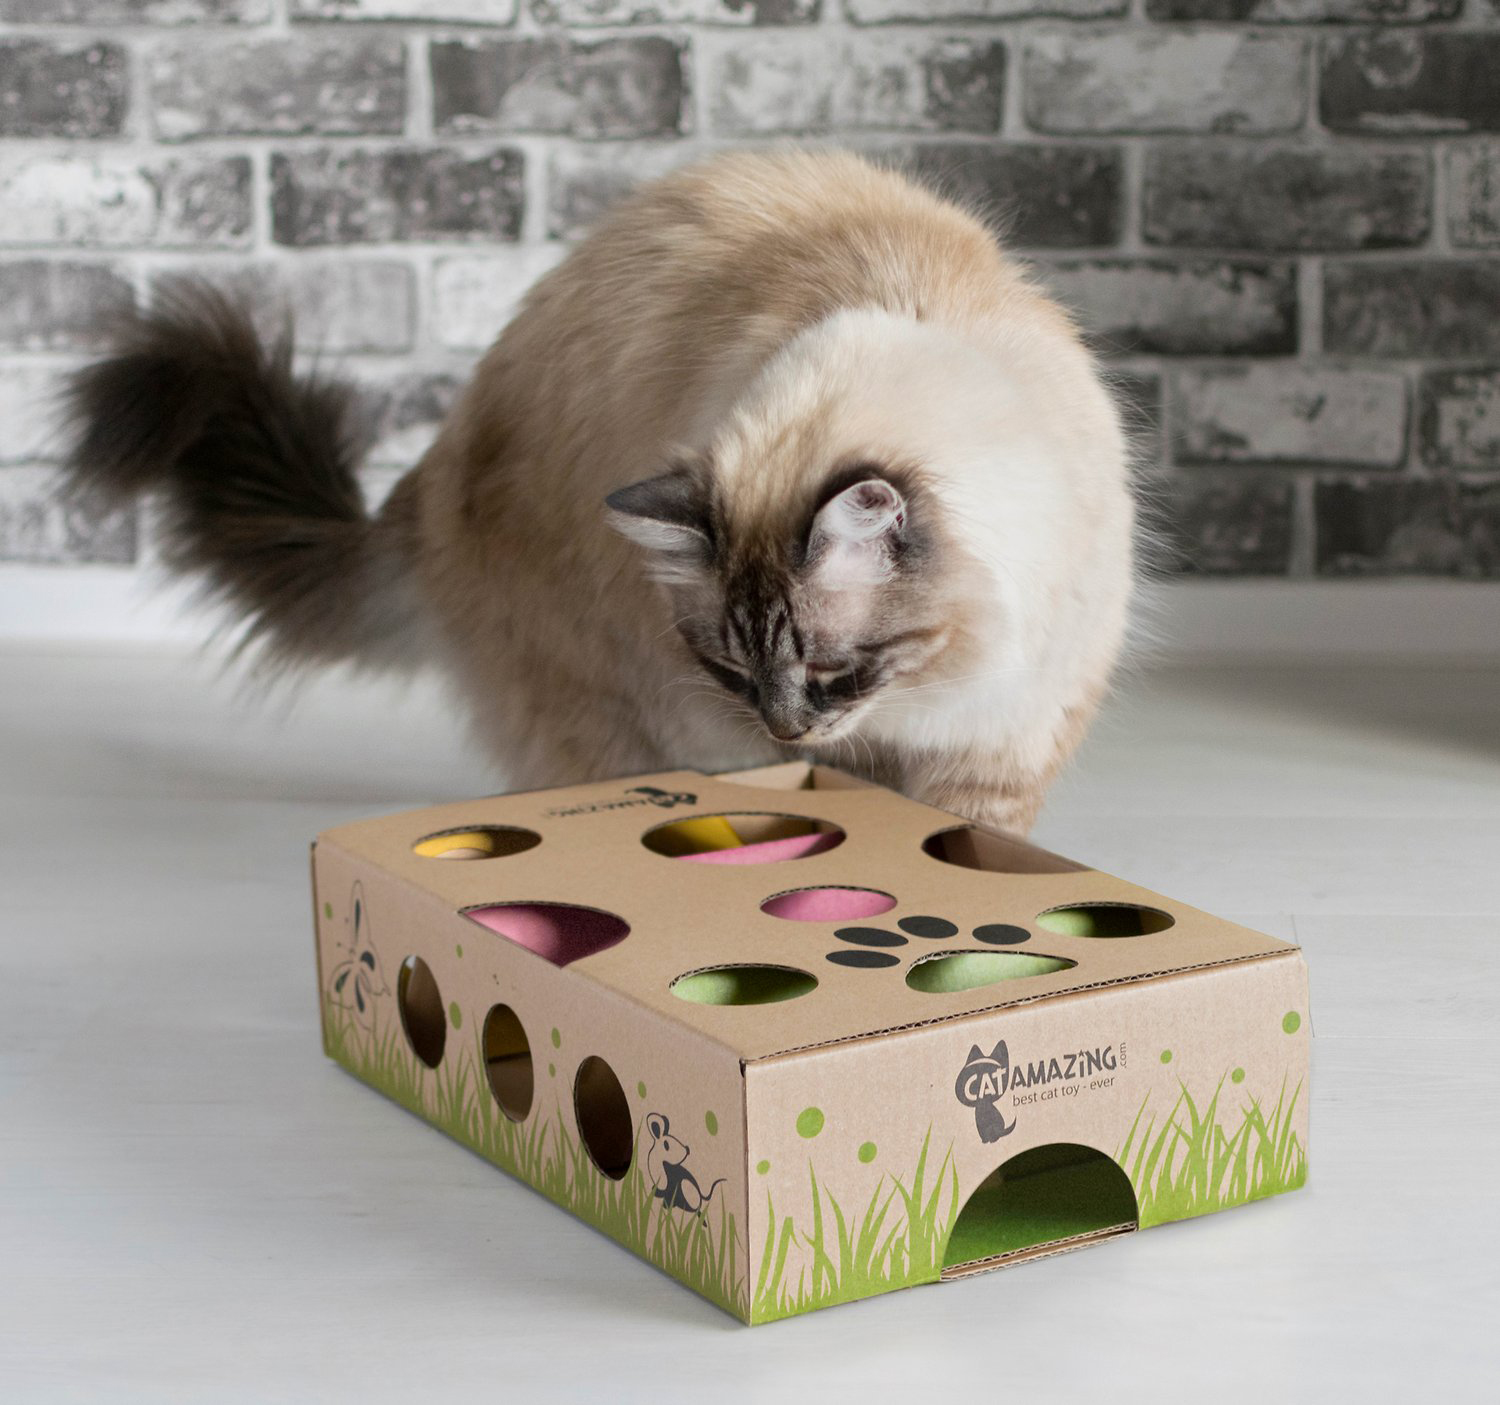 Top Interactive Cat Puzzle Toys Compared